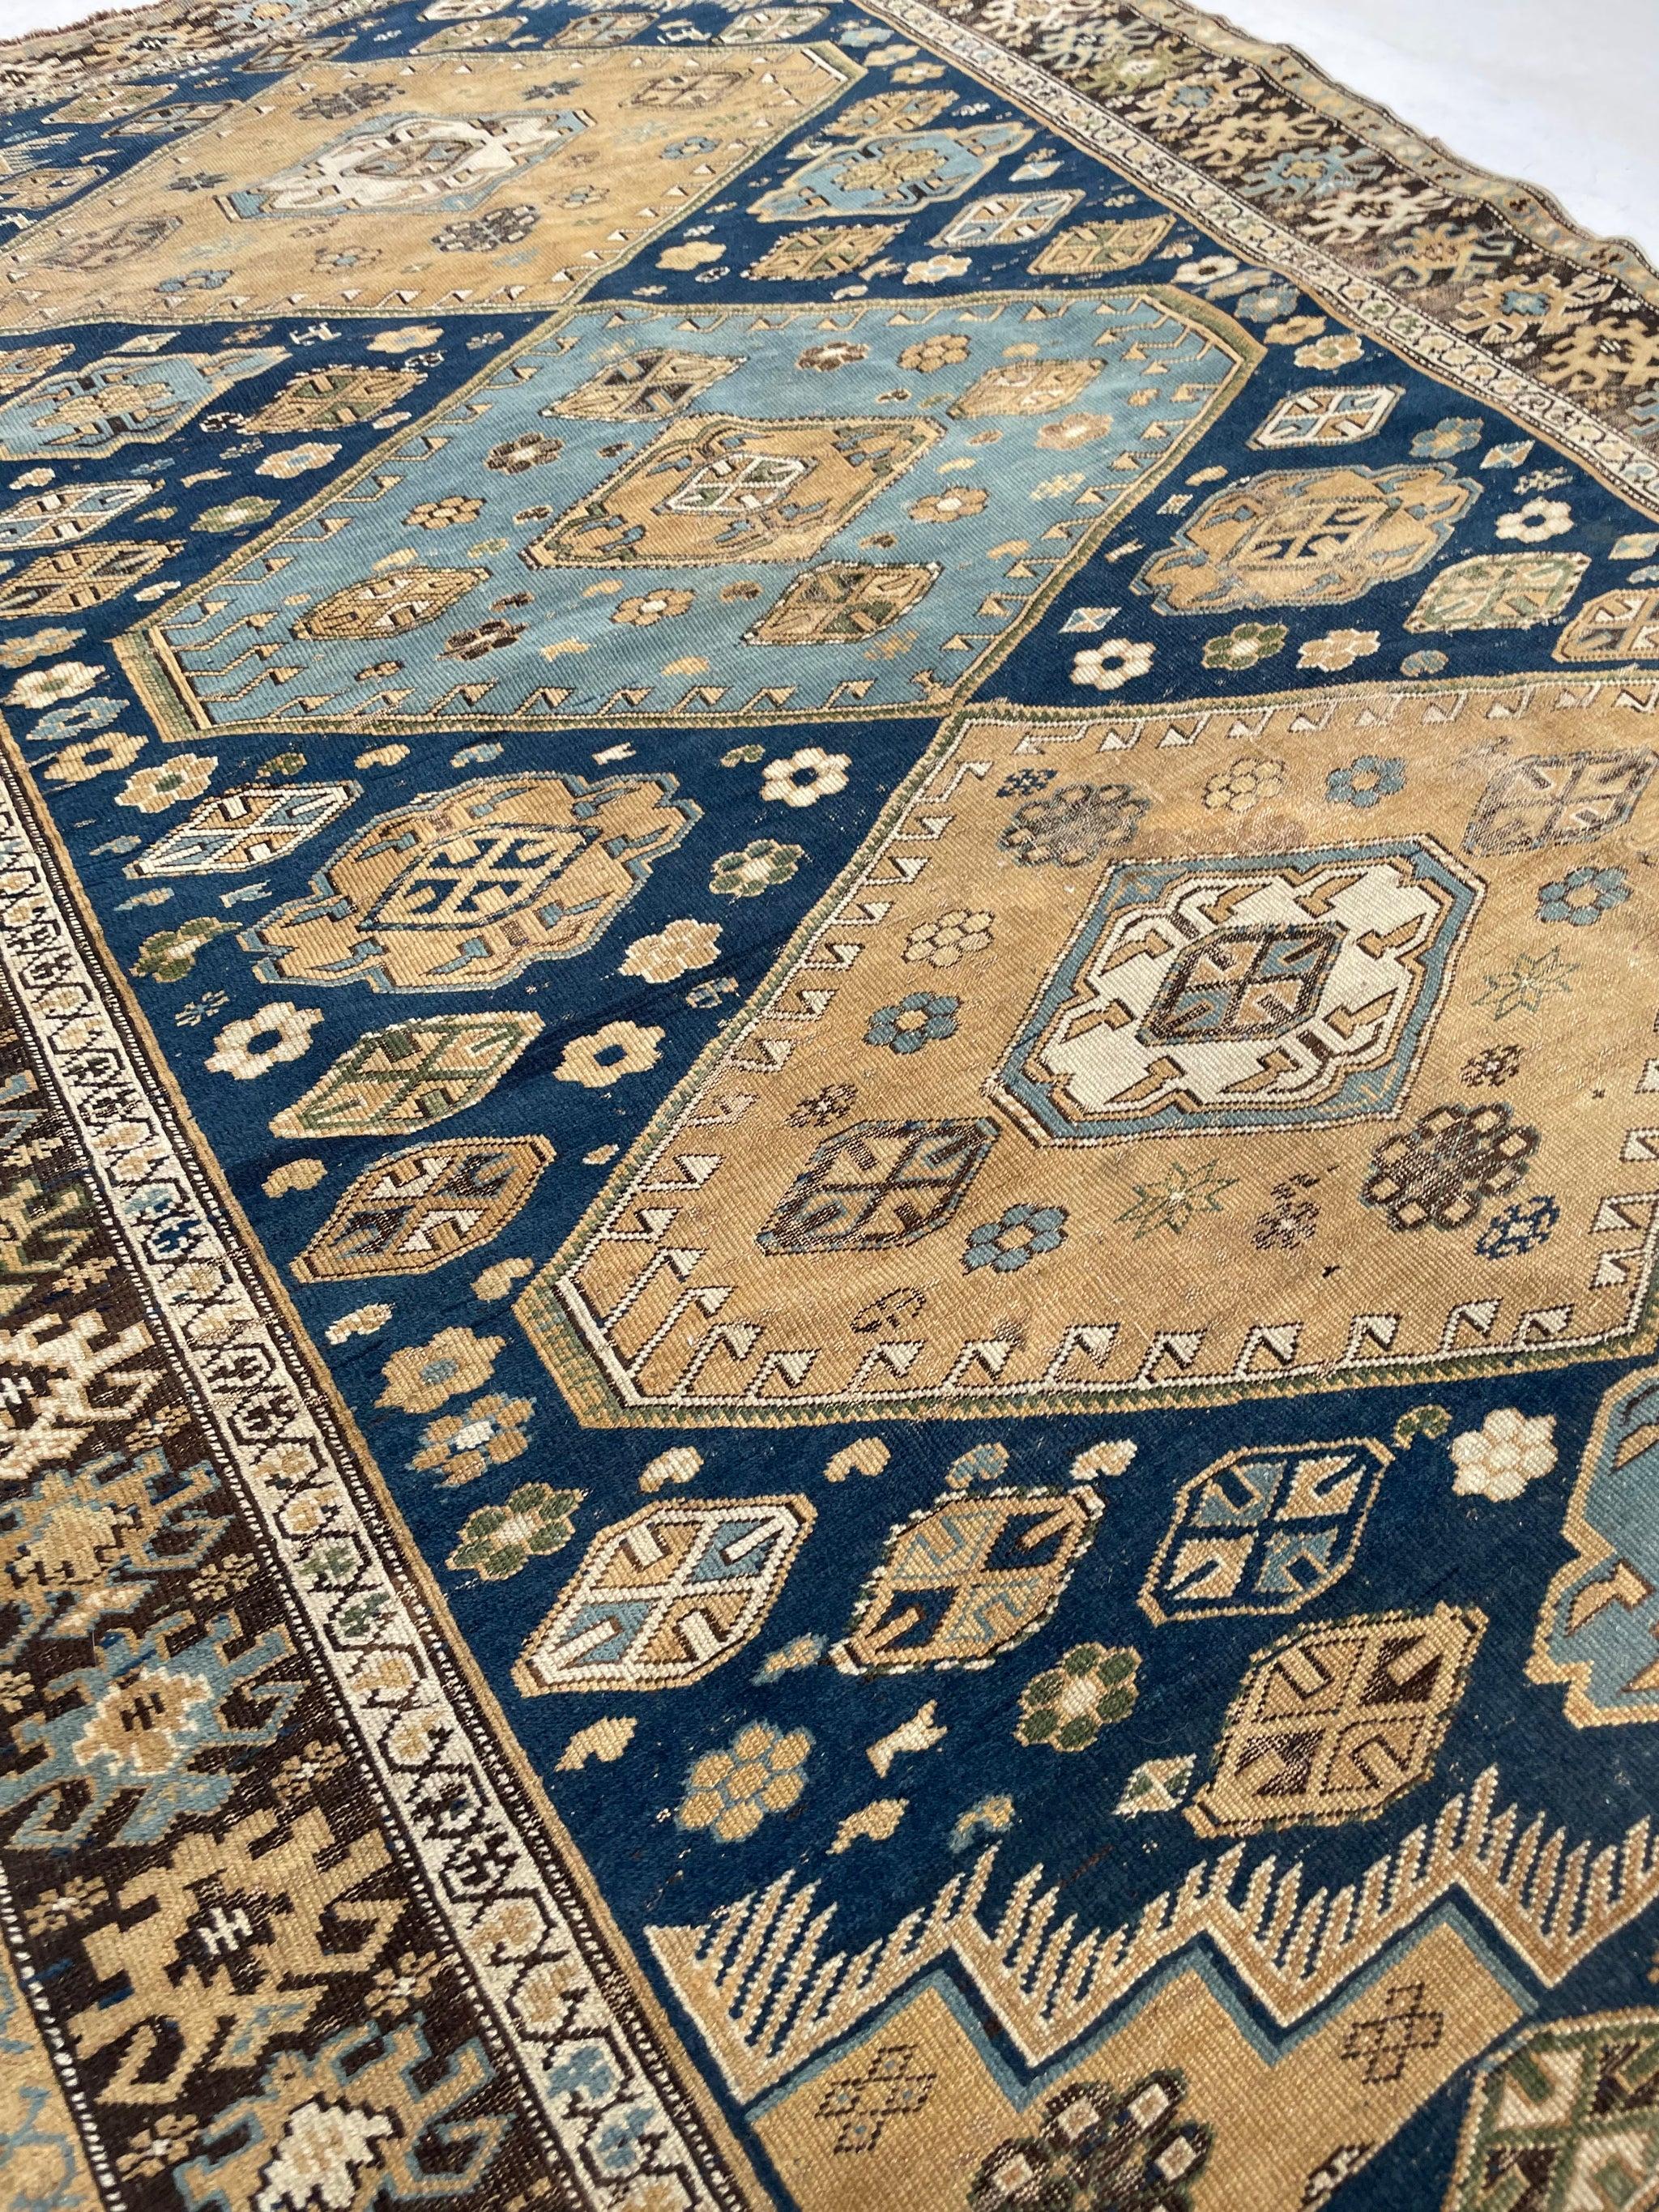 Super Fine Antique Caucasian Rug  Denim & Sky Blue With Espresso And Golden Wheat 

About: Lots of earthy hues with sensational blue dyes derived from the indigo plant and some of the yellowish-browns look like the color of a golden pear-leaf